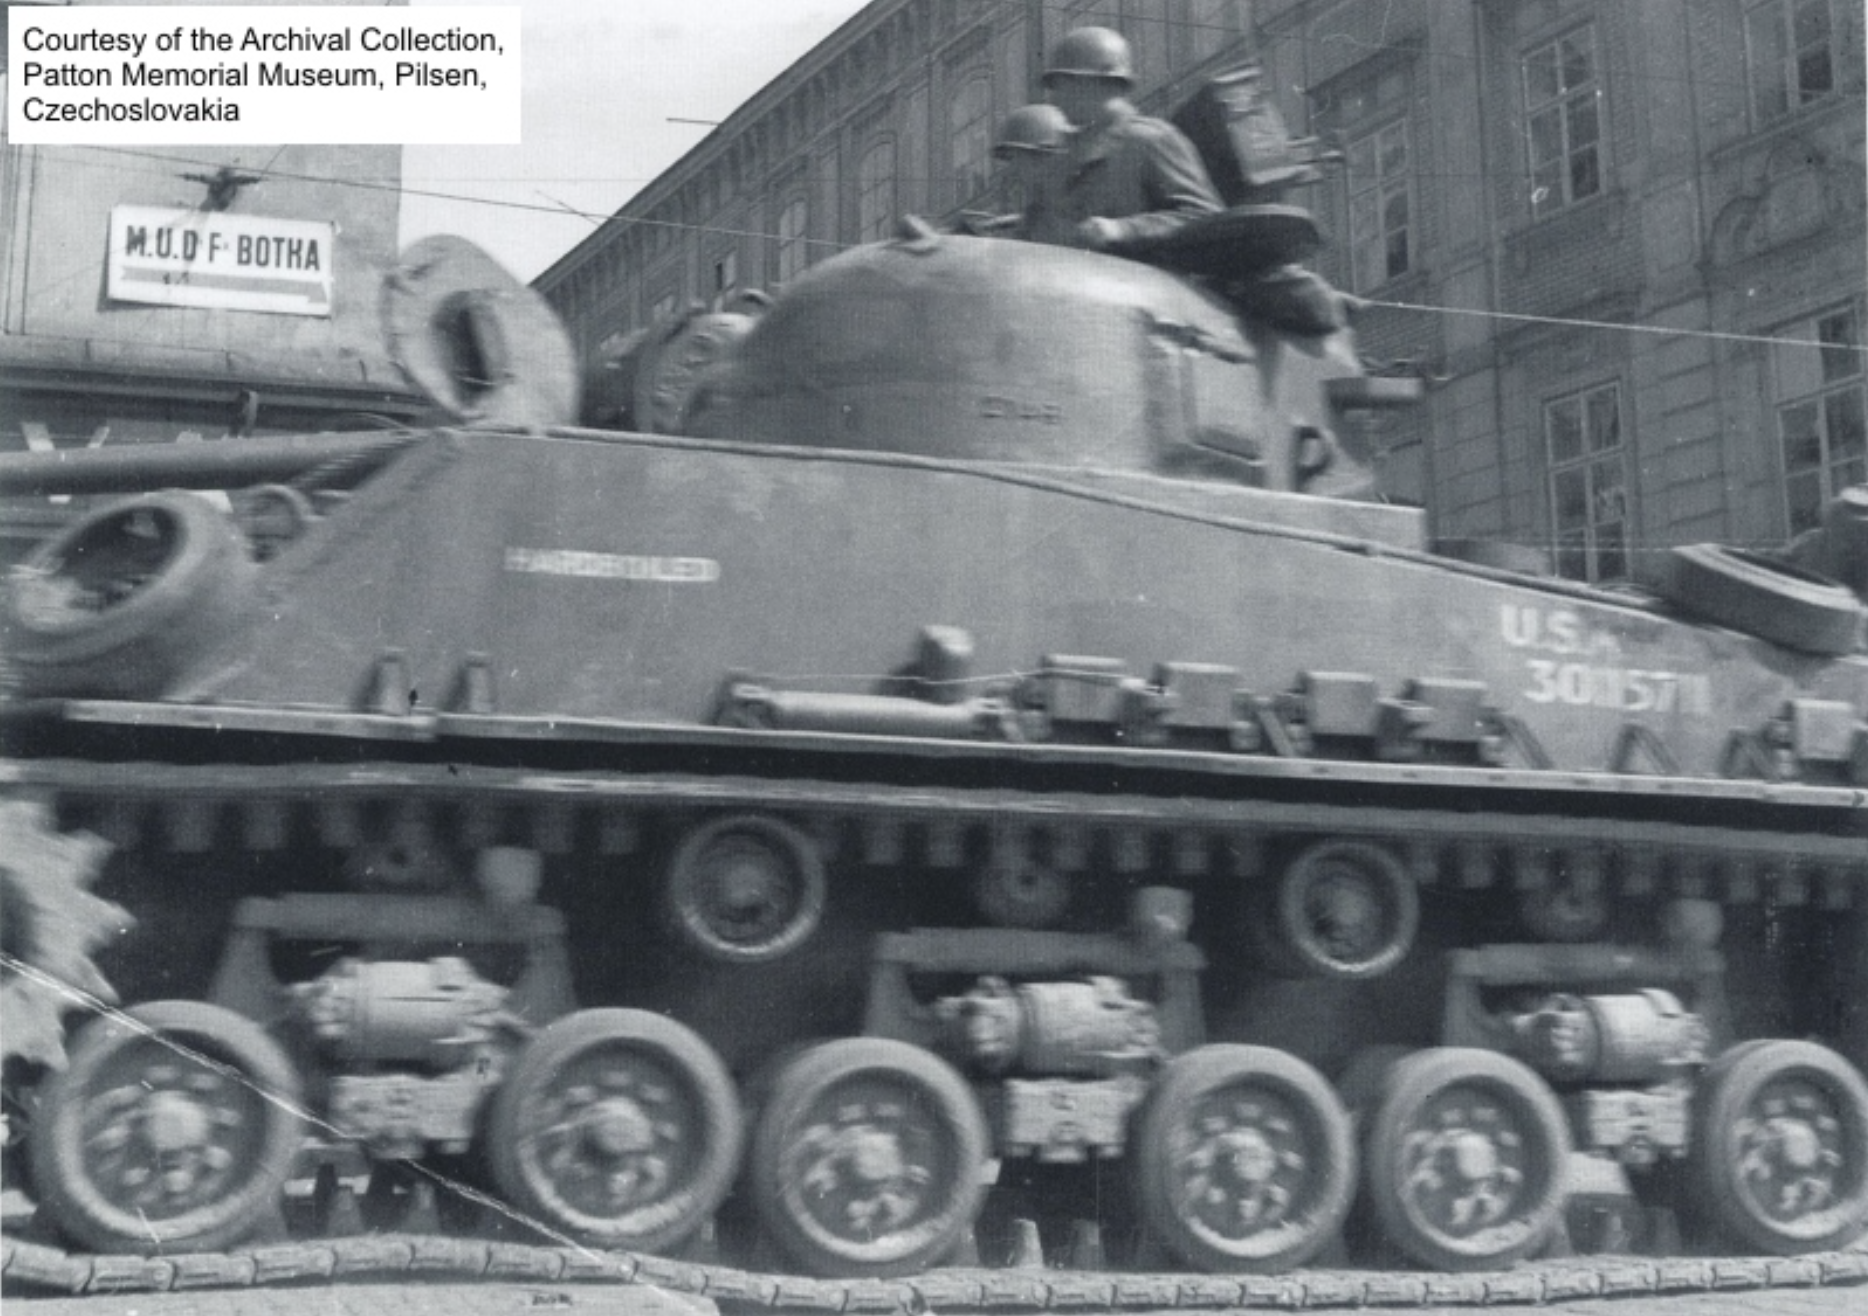 “Hardboiled”, an M4A3(75)W HVSS of the 16th Armored Division in Pilsen, Czechoslovakia, May, 1945